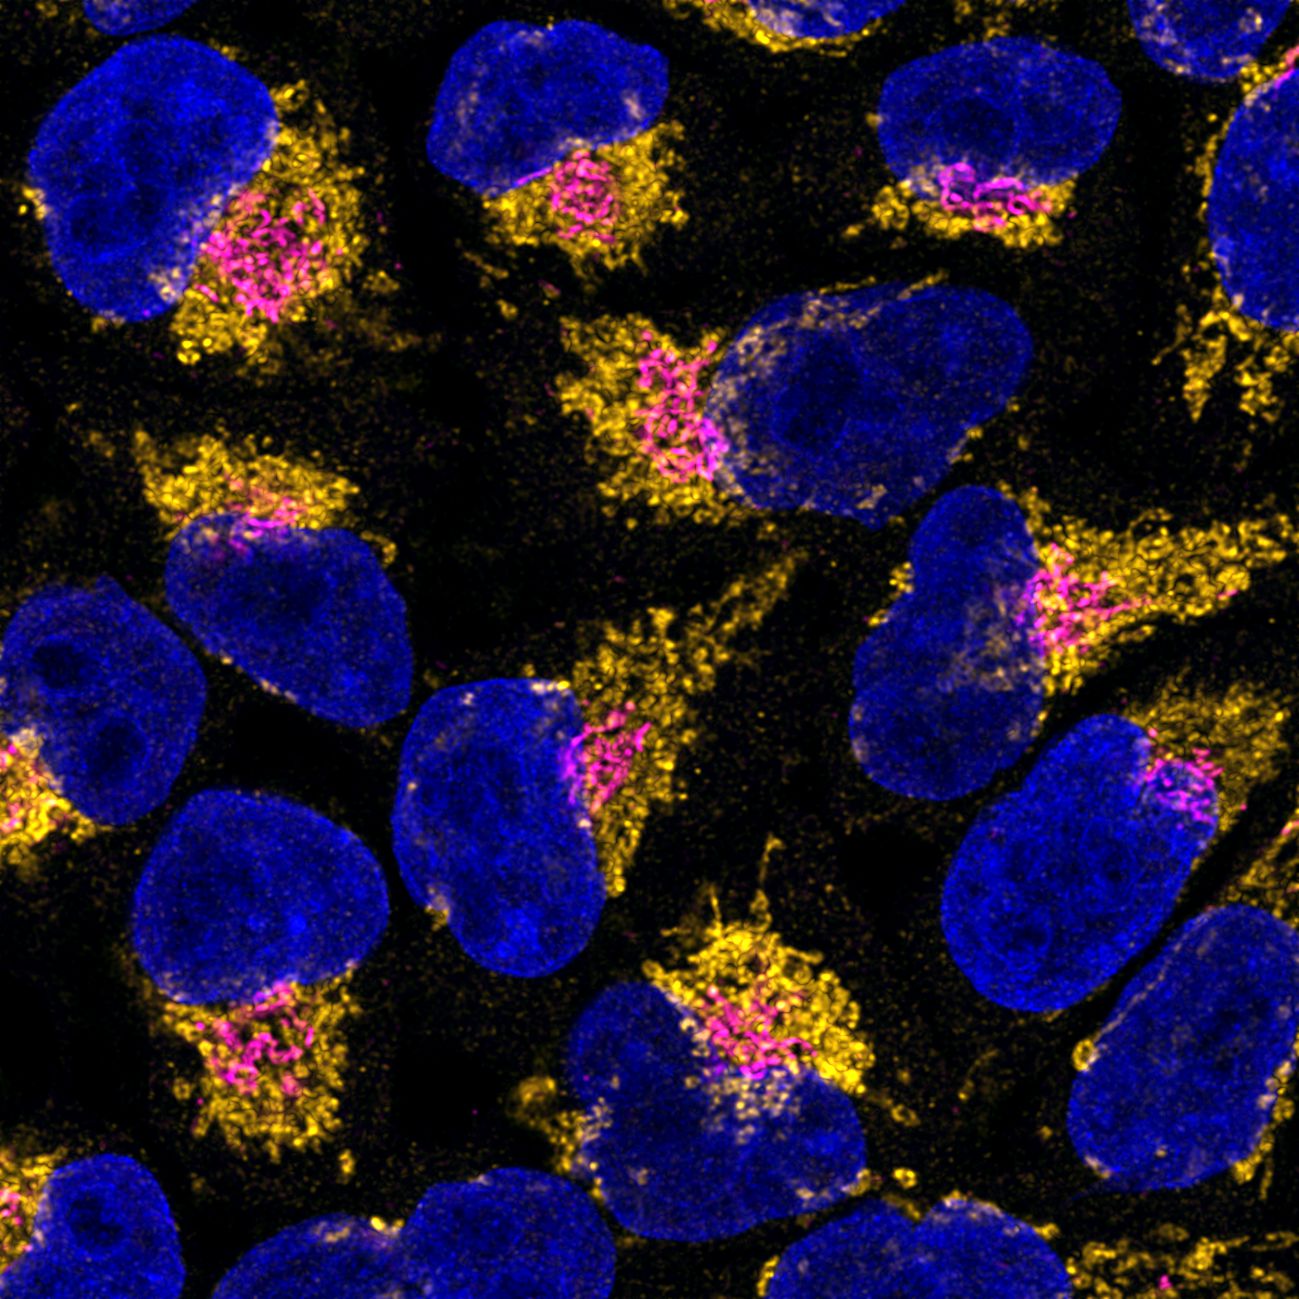 Immunofluorescence of HeLa: PFA-fixed HeLa cells were stained with anti-COXIV (11242-1-AP) labeled with FlexAble CoraLite® Plus 555 Kit (KFA002, yellow), anti-GM130 (11308-1-AP) labeled with FlexAble CoraLite® Plus 647 Kit (KFA003, magenta) and DAPI (blue).​ Confocal images were acquired with a 100x oil objective and post-processed. Images were recorded at the Core Facility Bioimaging at the Biomedical Center, LMU Munich.